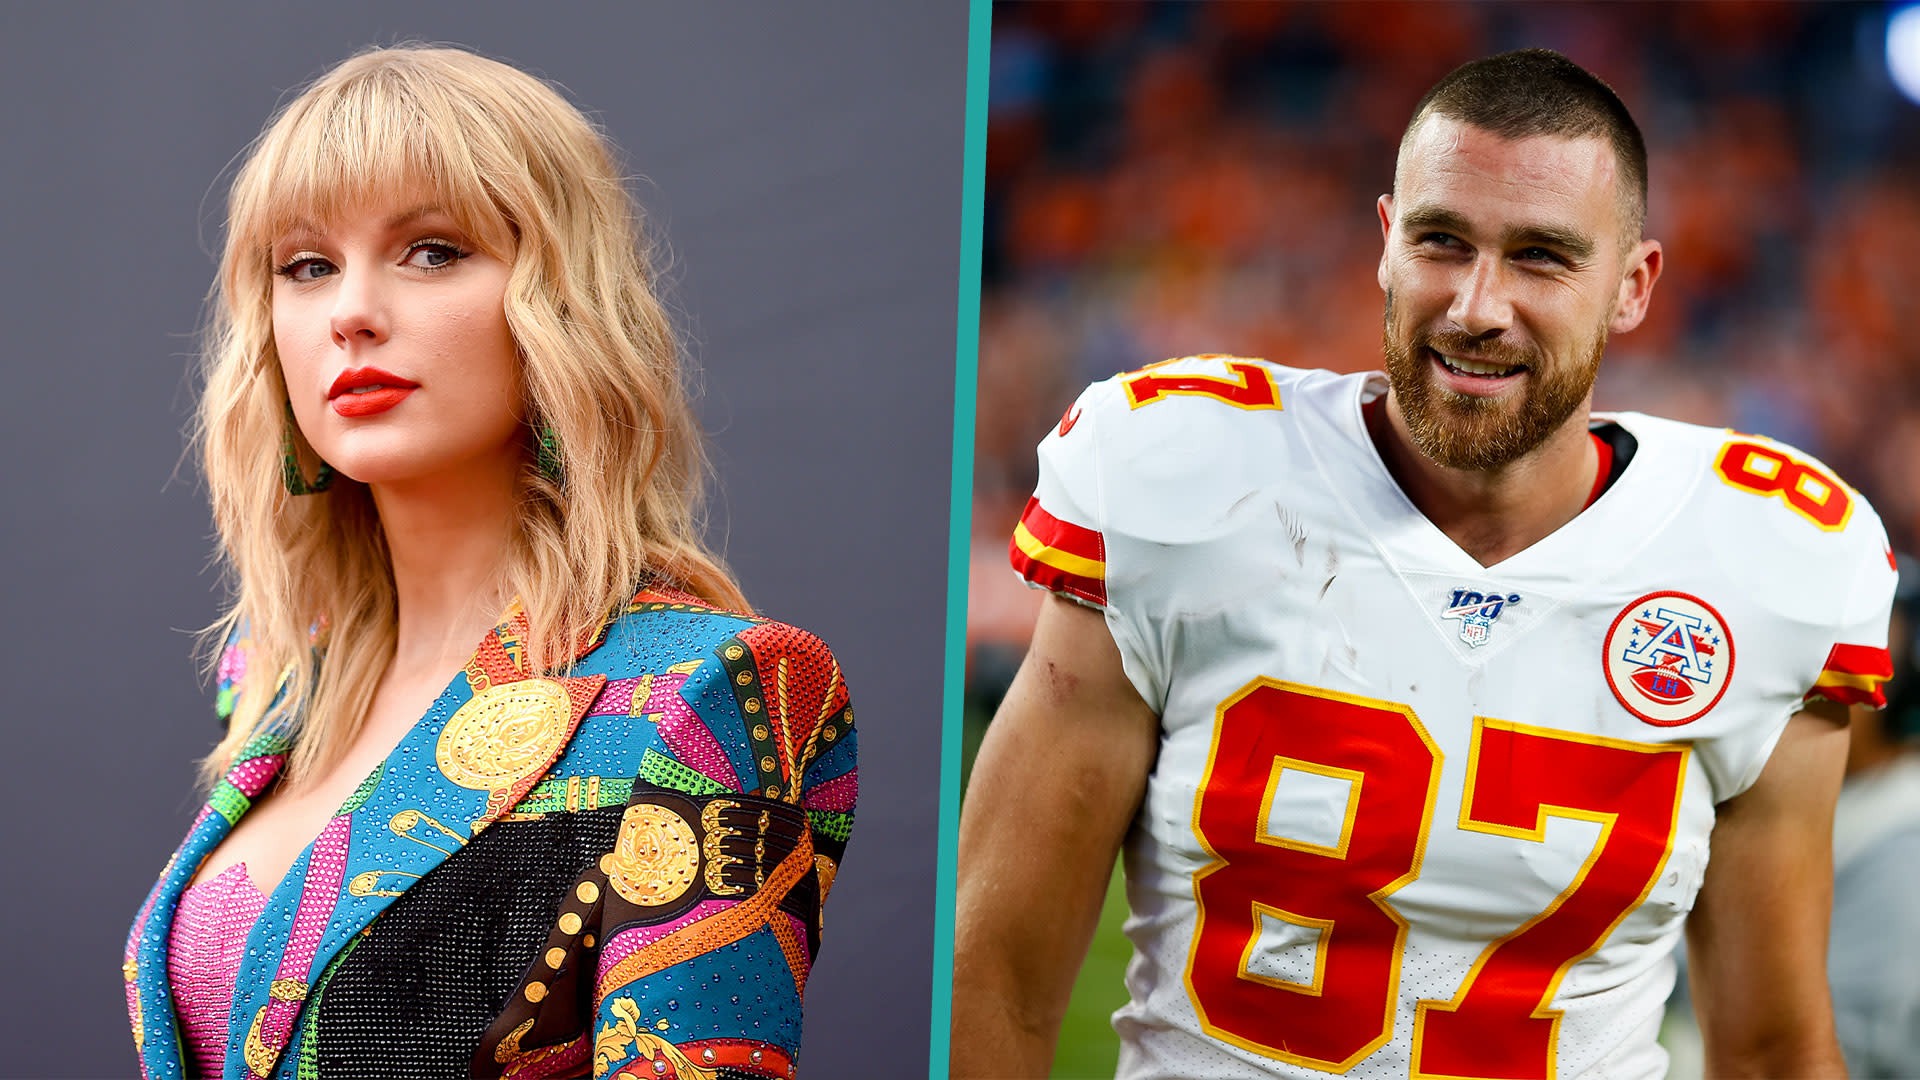 I can't believe we did it' Travis Kelce revealed he is curious about the result'-Taylor Swift & Kayla Nicole 